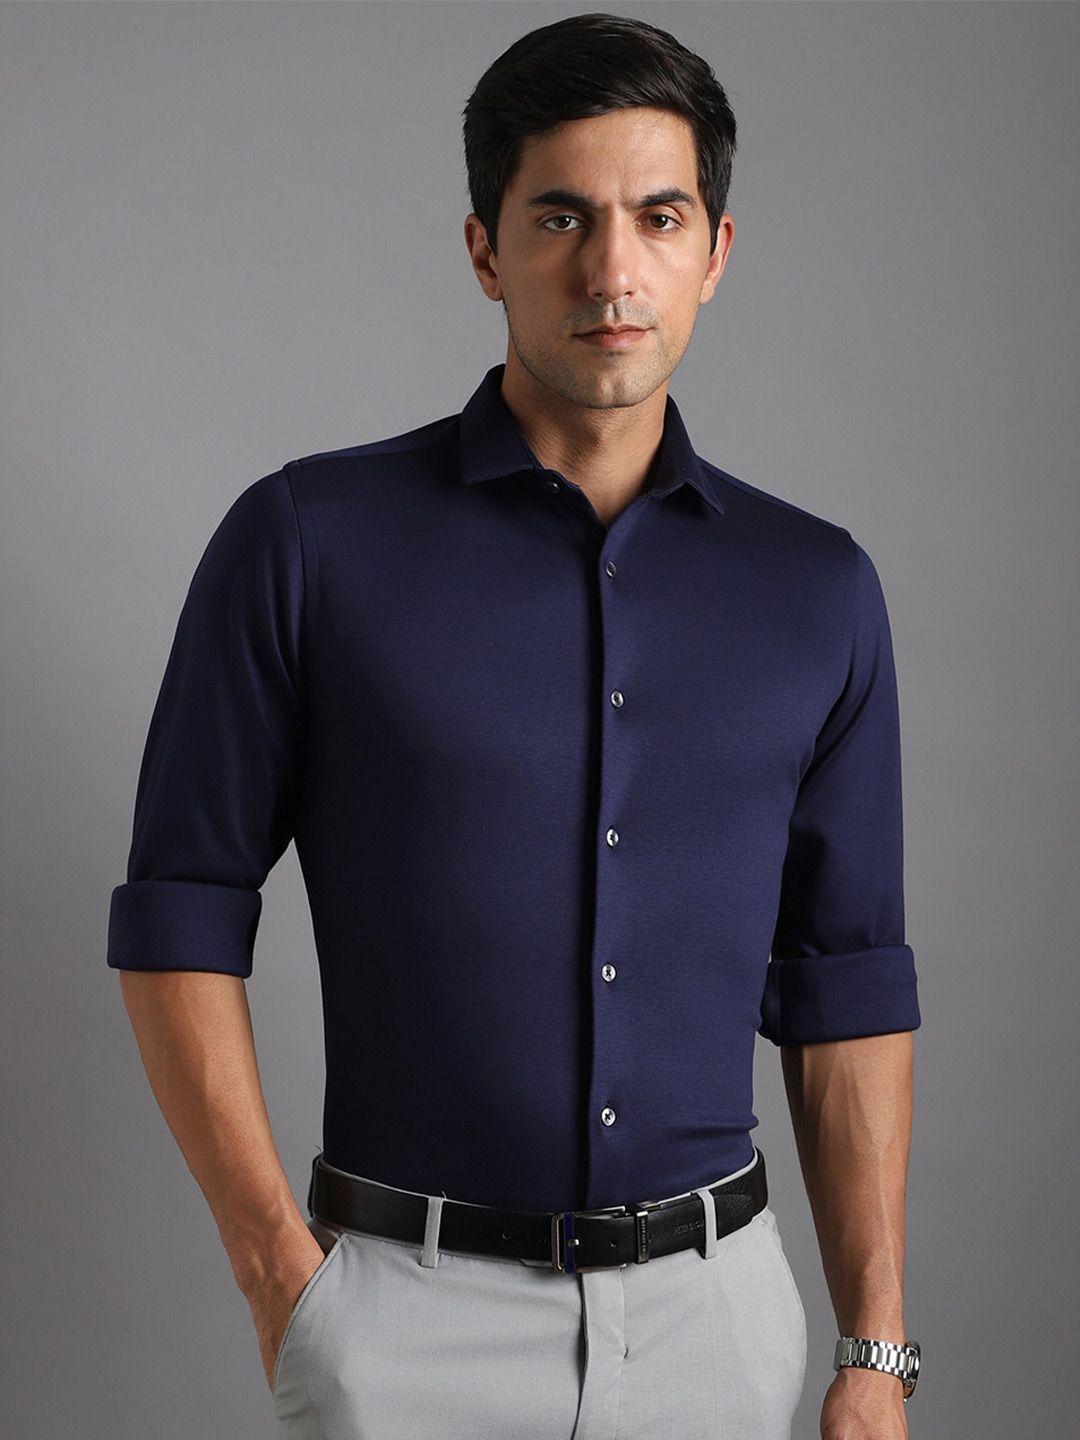 bergamo slim fit pure cotton knitted formal shirt